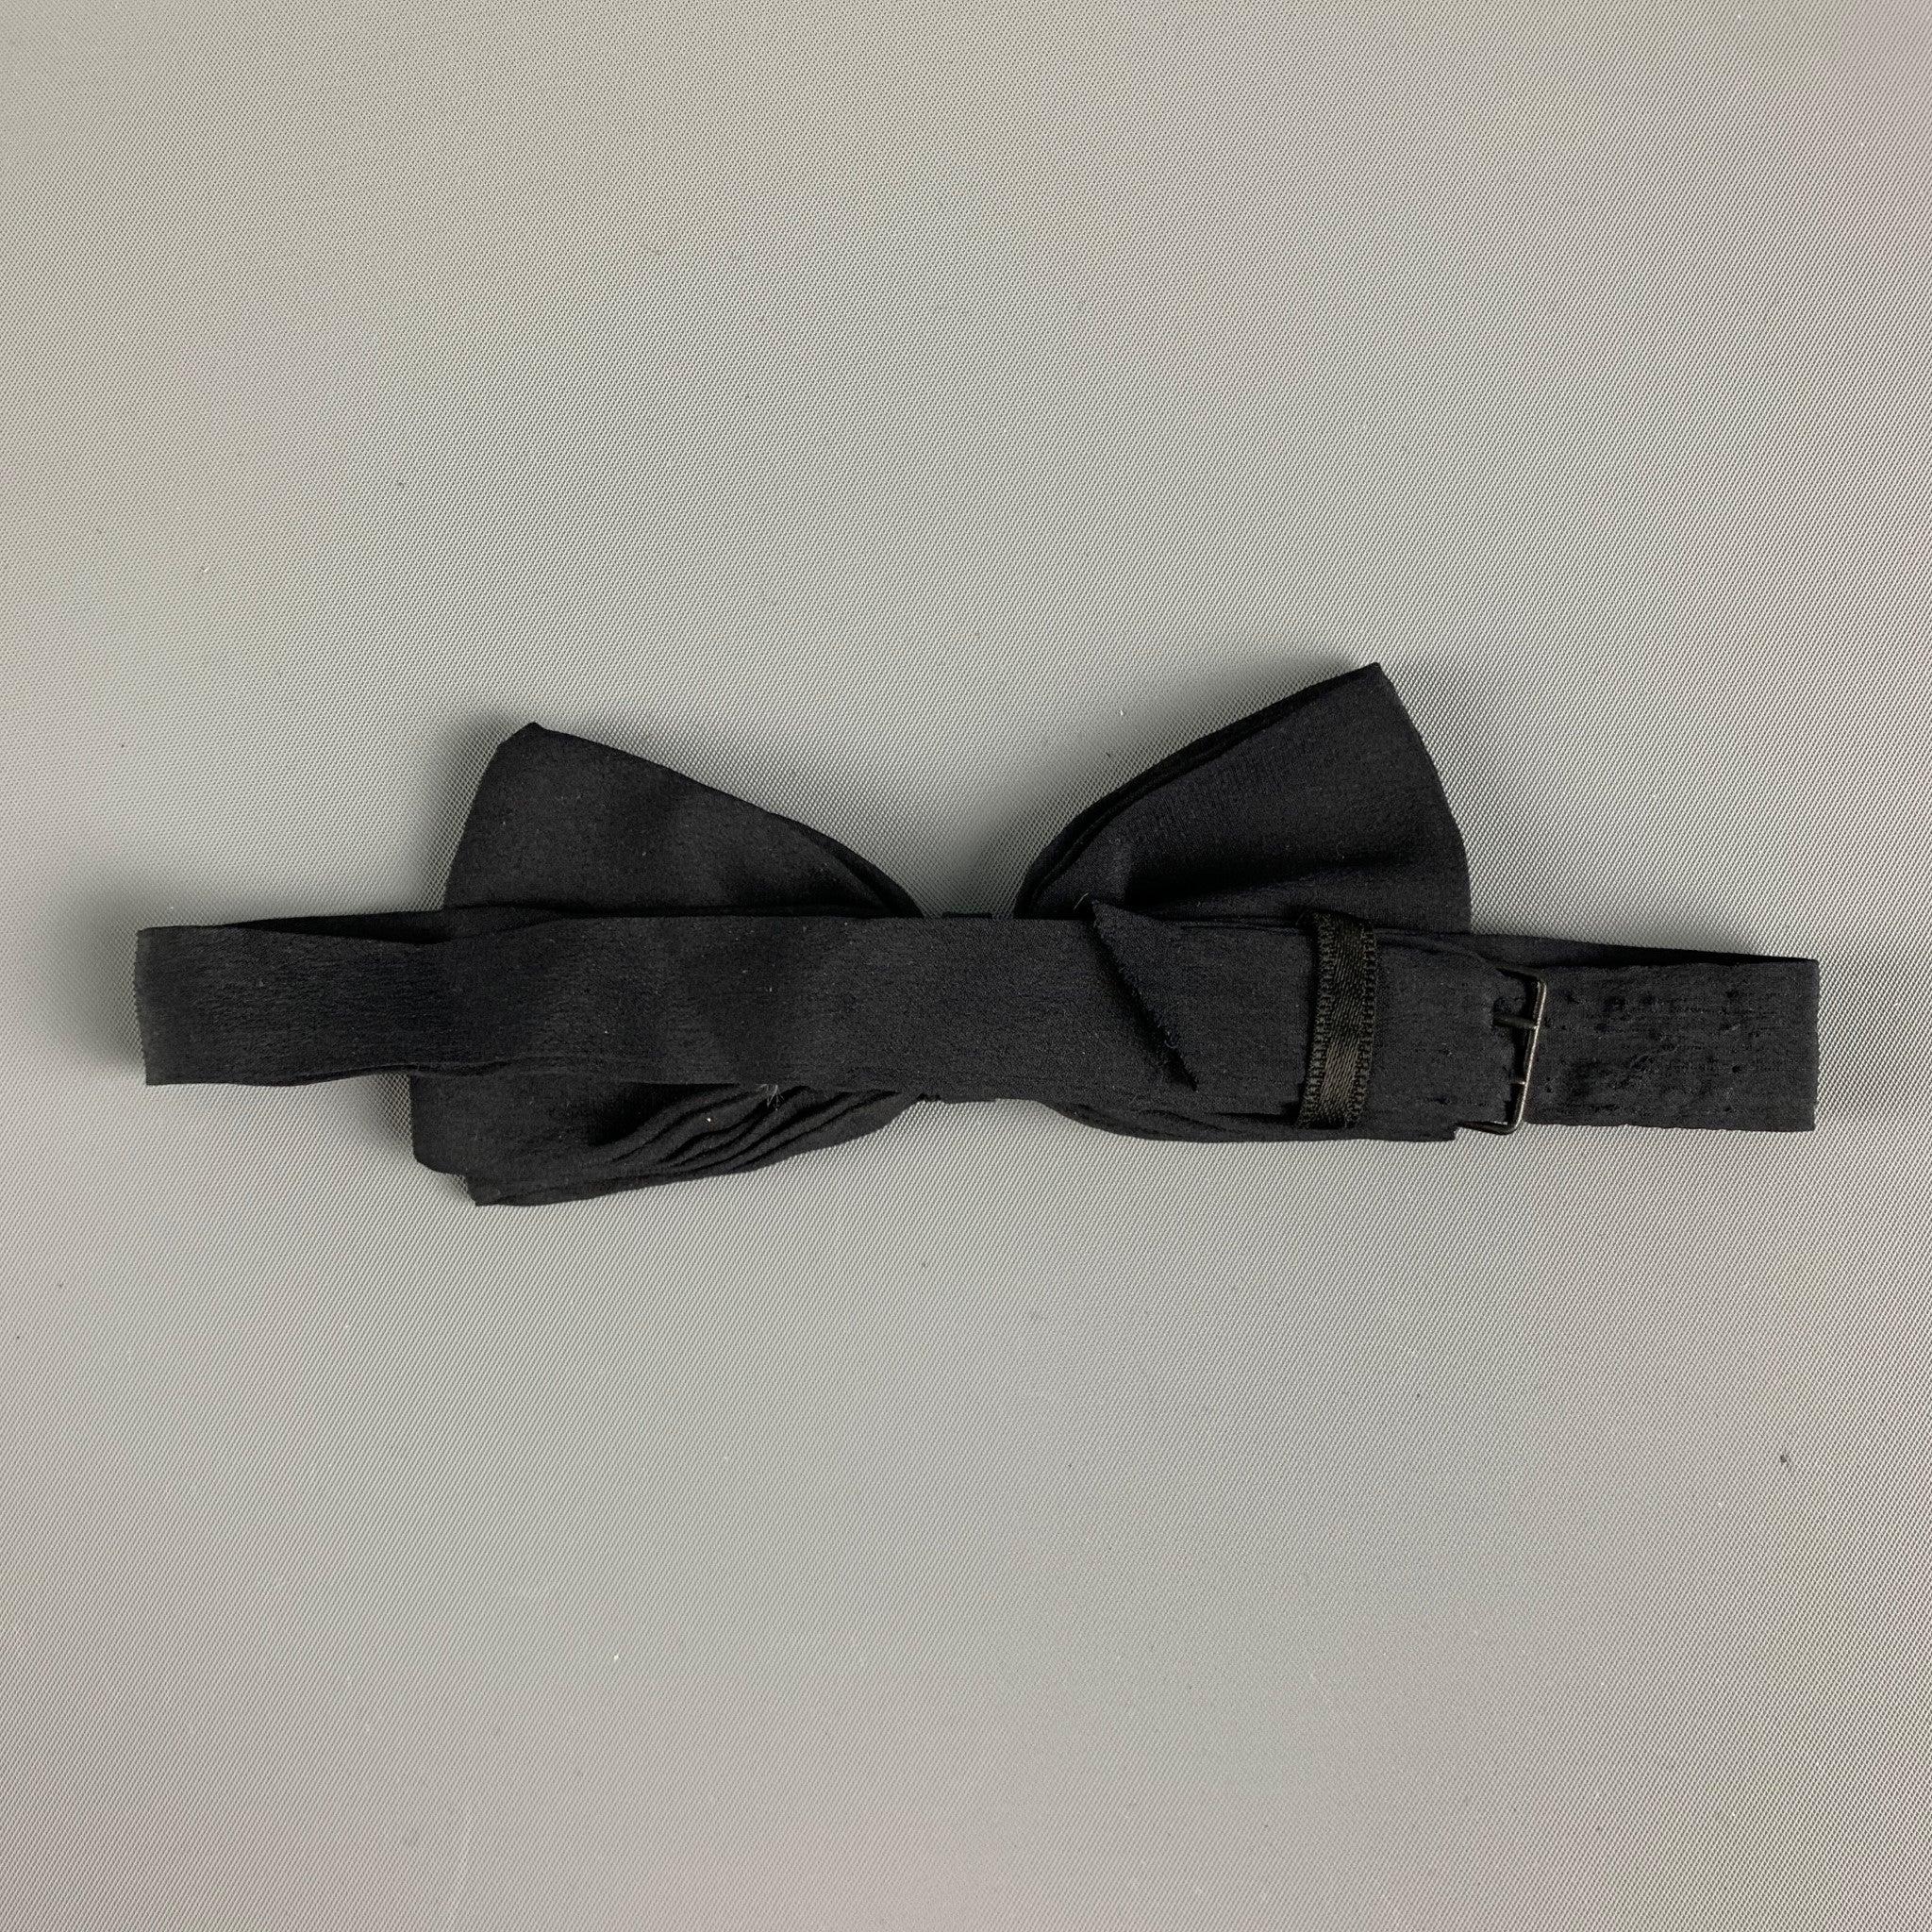 WILKES BASHFORD pre-tied bow tie comes in a black silk chiffon with an adjustable fit.Very Good Pre-Owned Condition.Width: 2.25 inches 

  
  
 
Reference: 125466
Category: Bow Tie
More Details
    
Brand:  WILKES BASHFORD
Gender:  Male
Color: 